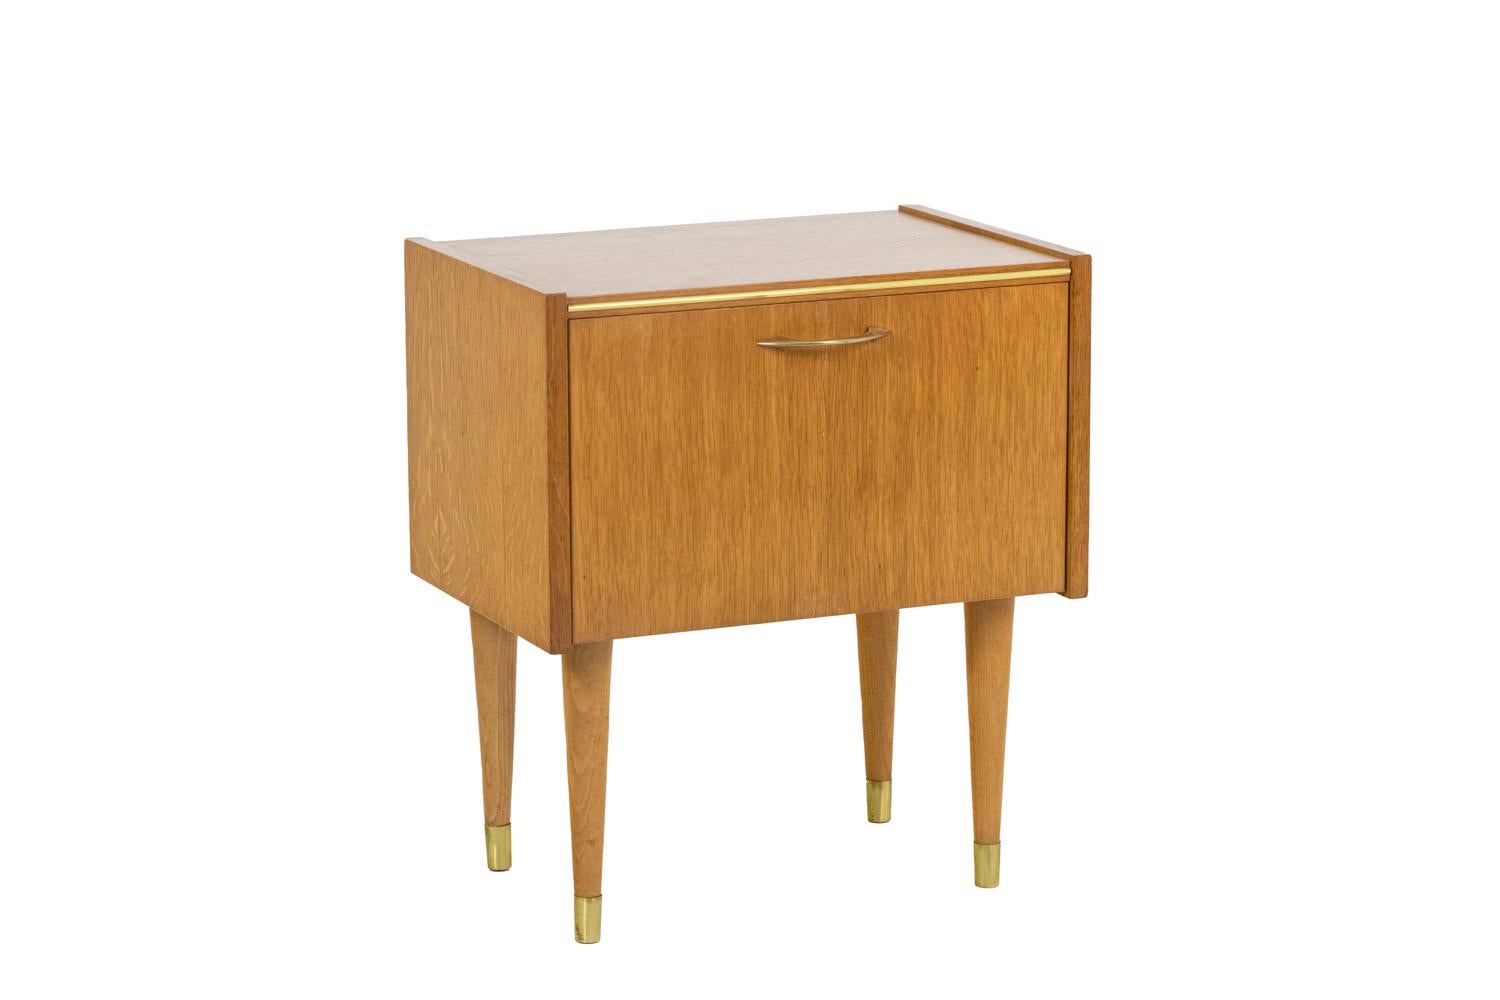 Semb, edited by. 

Pair of bedside tables in blond oak, tapered legs ending in brass finishes. A central door opening downwards. Inside, the top of each foot is marked with a red stamp “S.E.M.B. registered model.” Rounded brass cuffs.

French